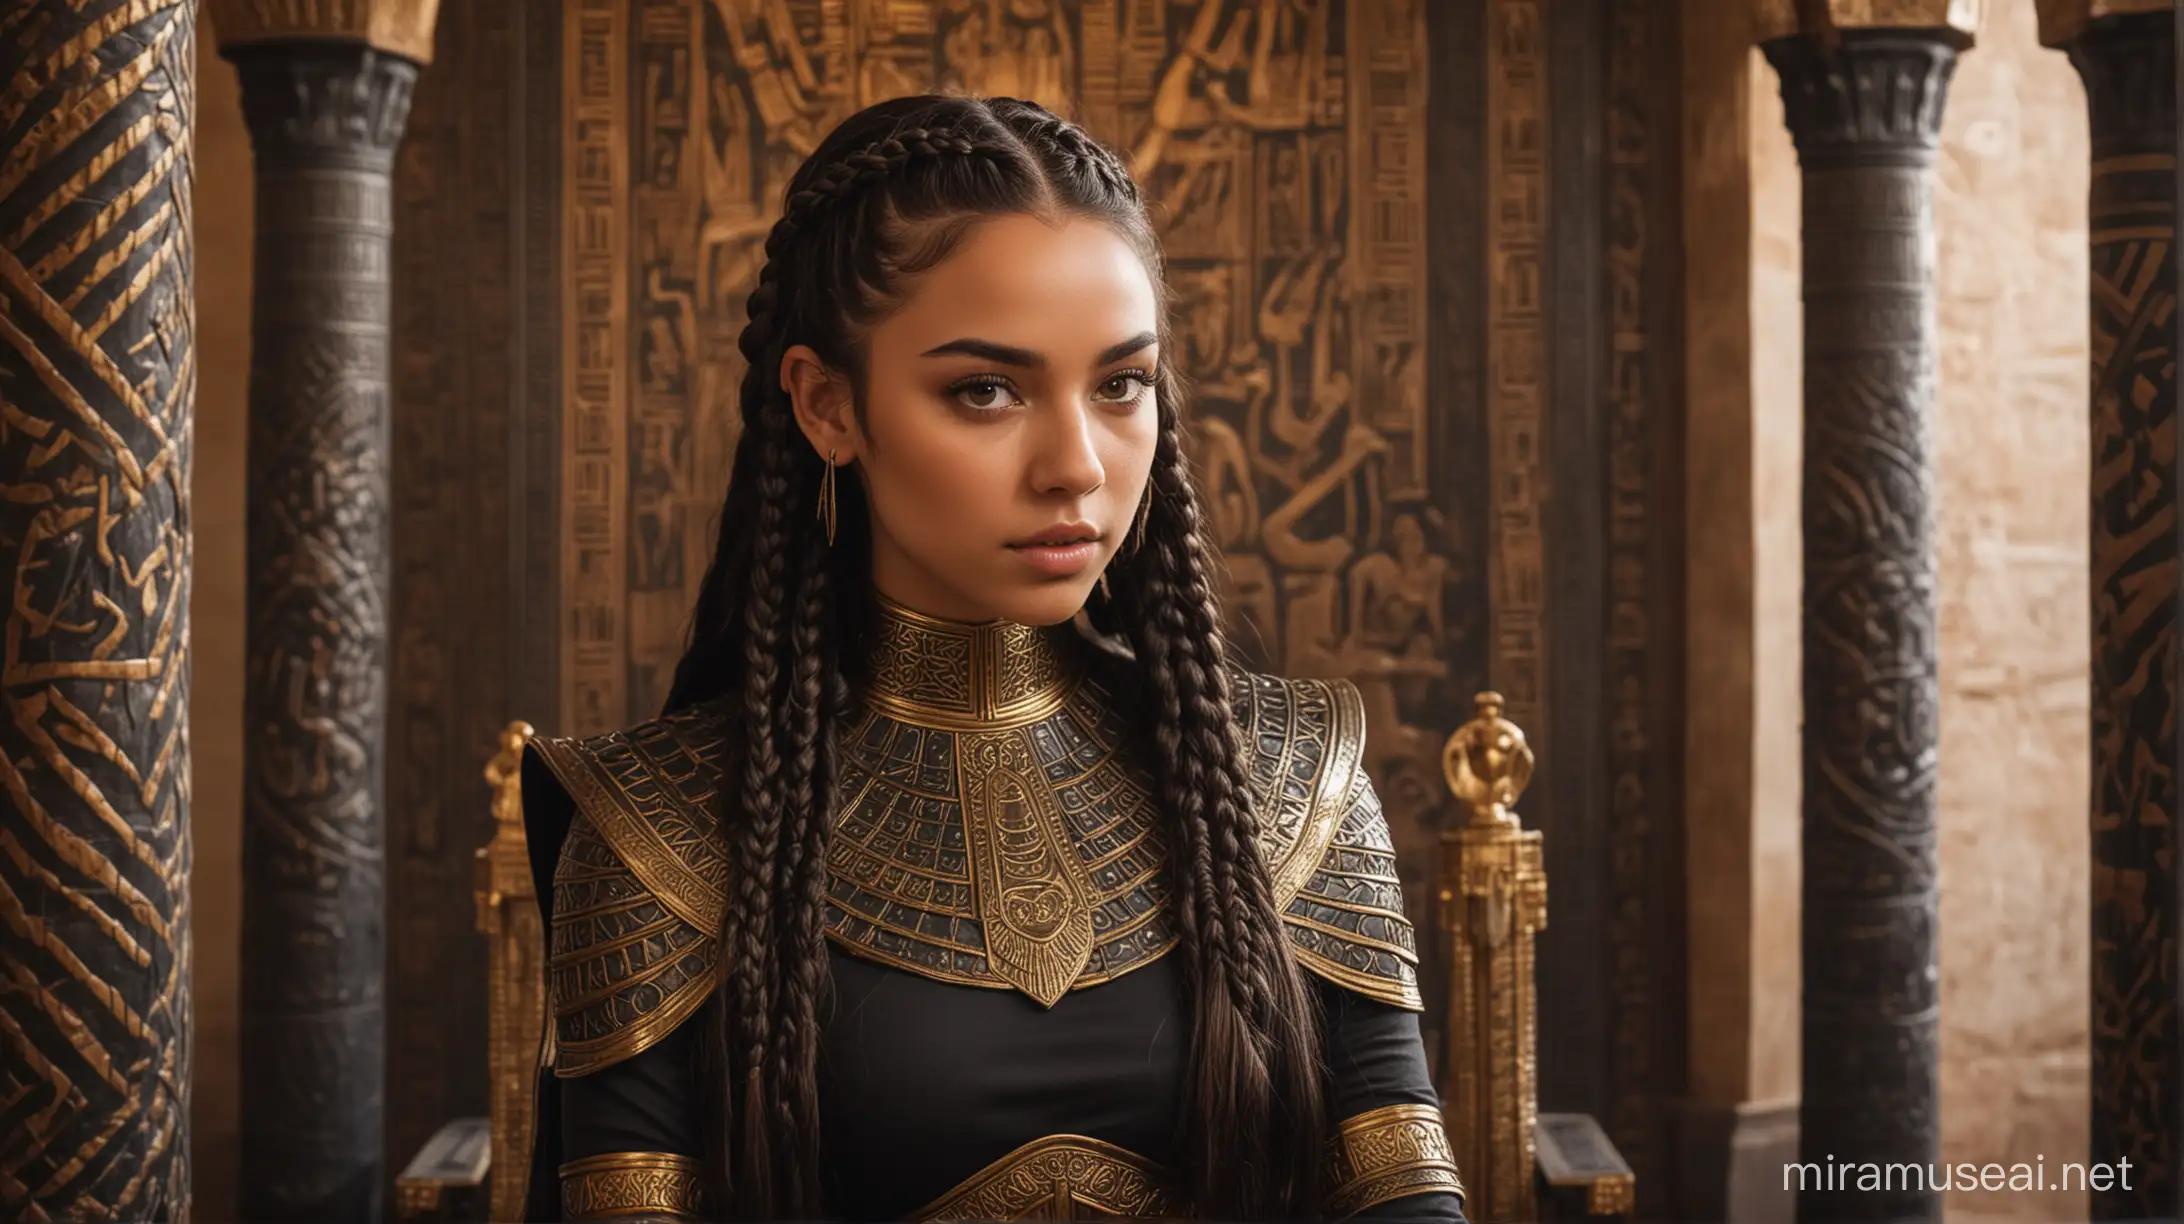 Beautiful young lady with long dark hair in braids, with caramel skin and honey gold eyes wearing black armour in an Egyptian throne room 